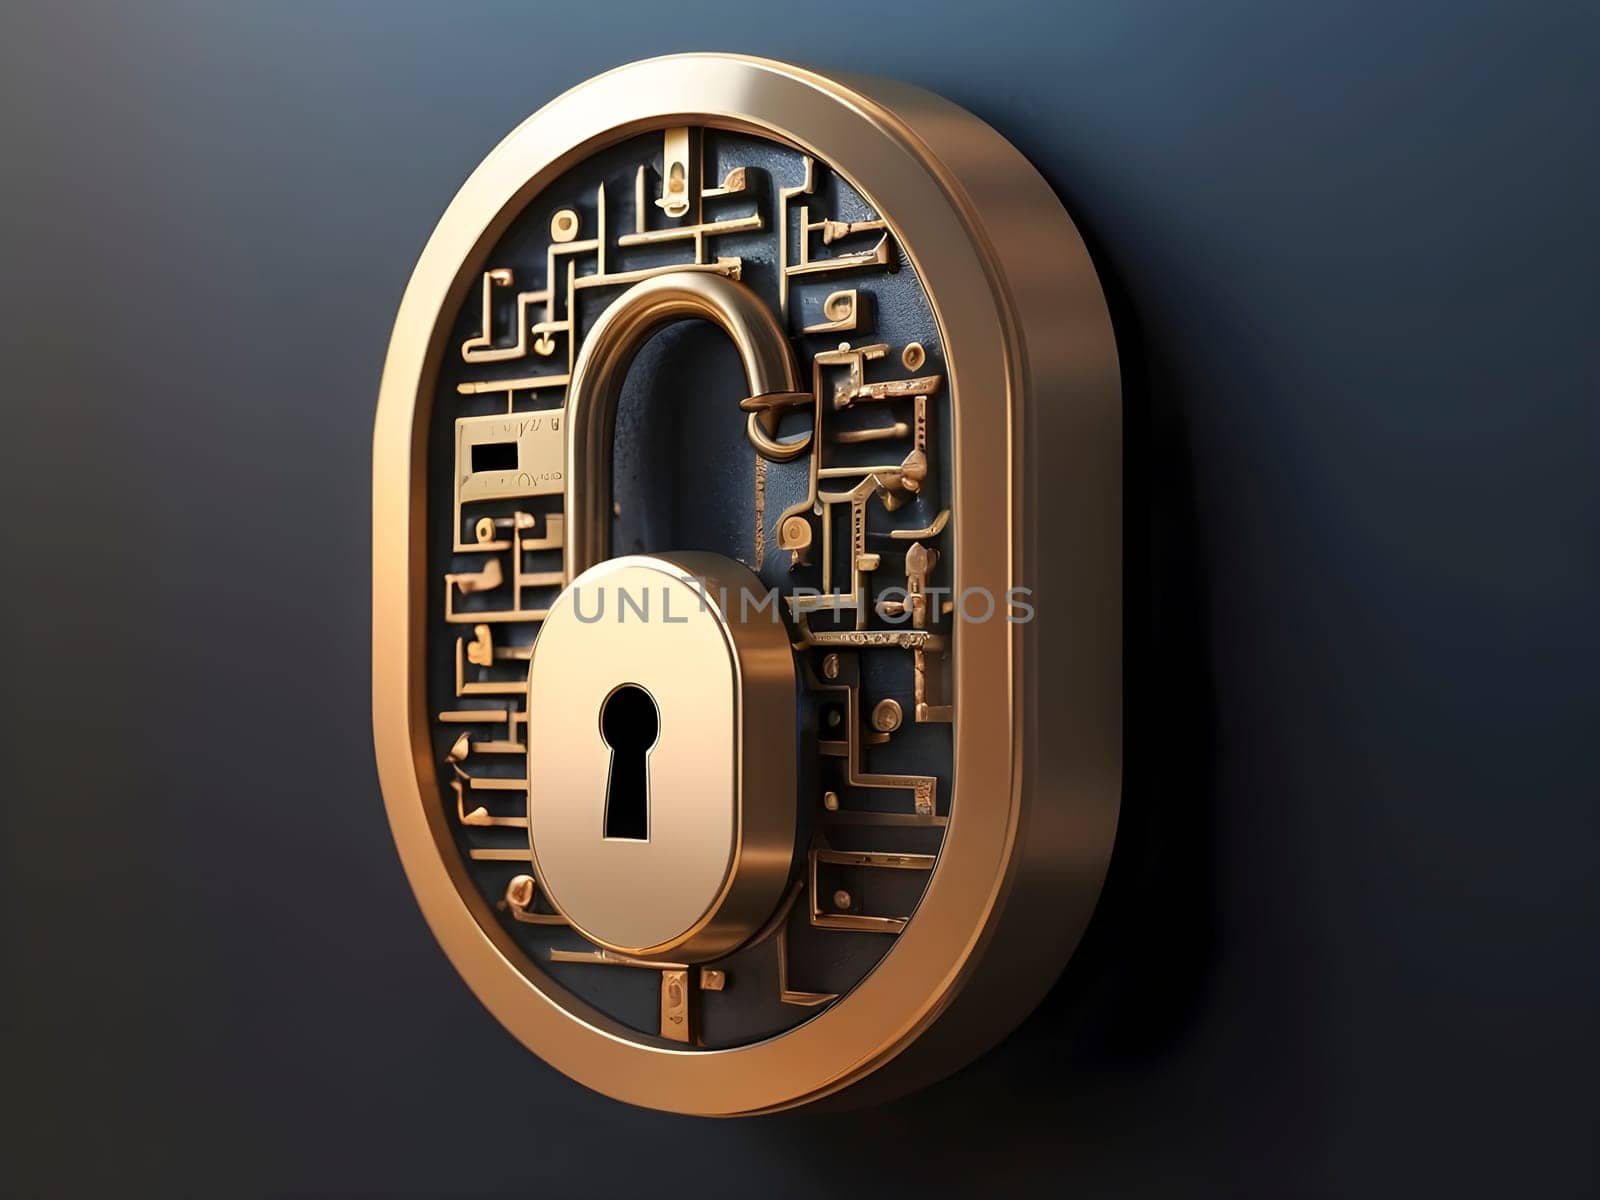 Key to Privacy. Navigating the Digital World with Lock and Key Code.